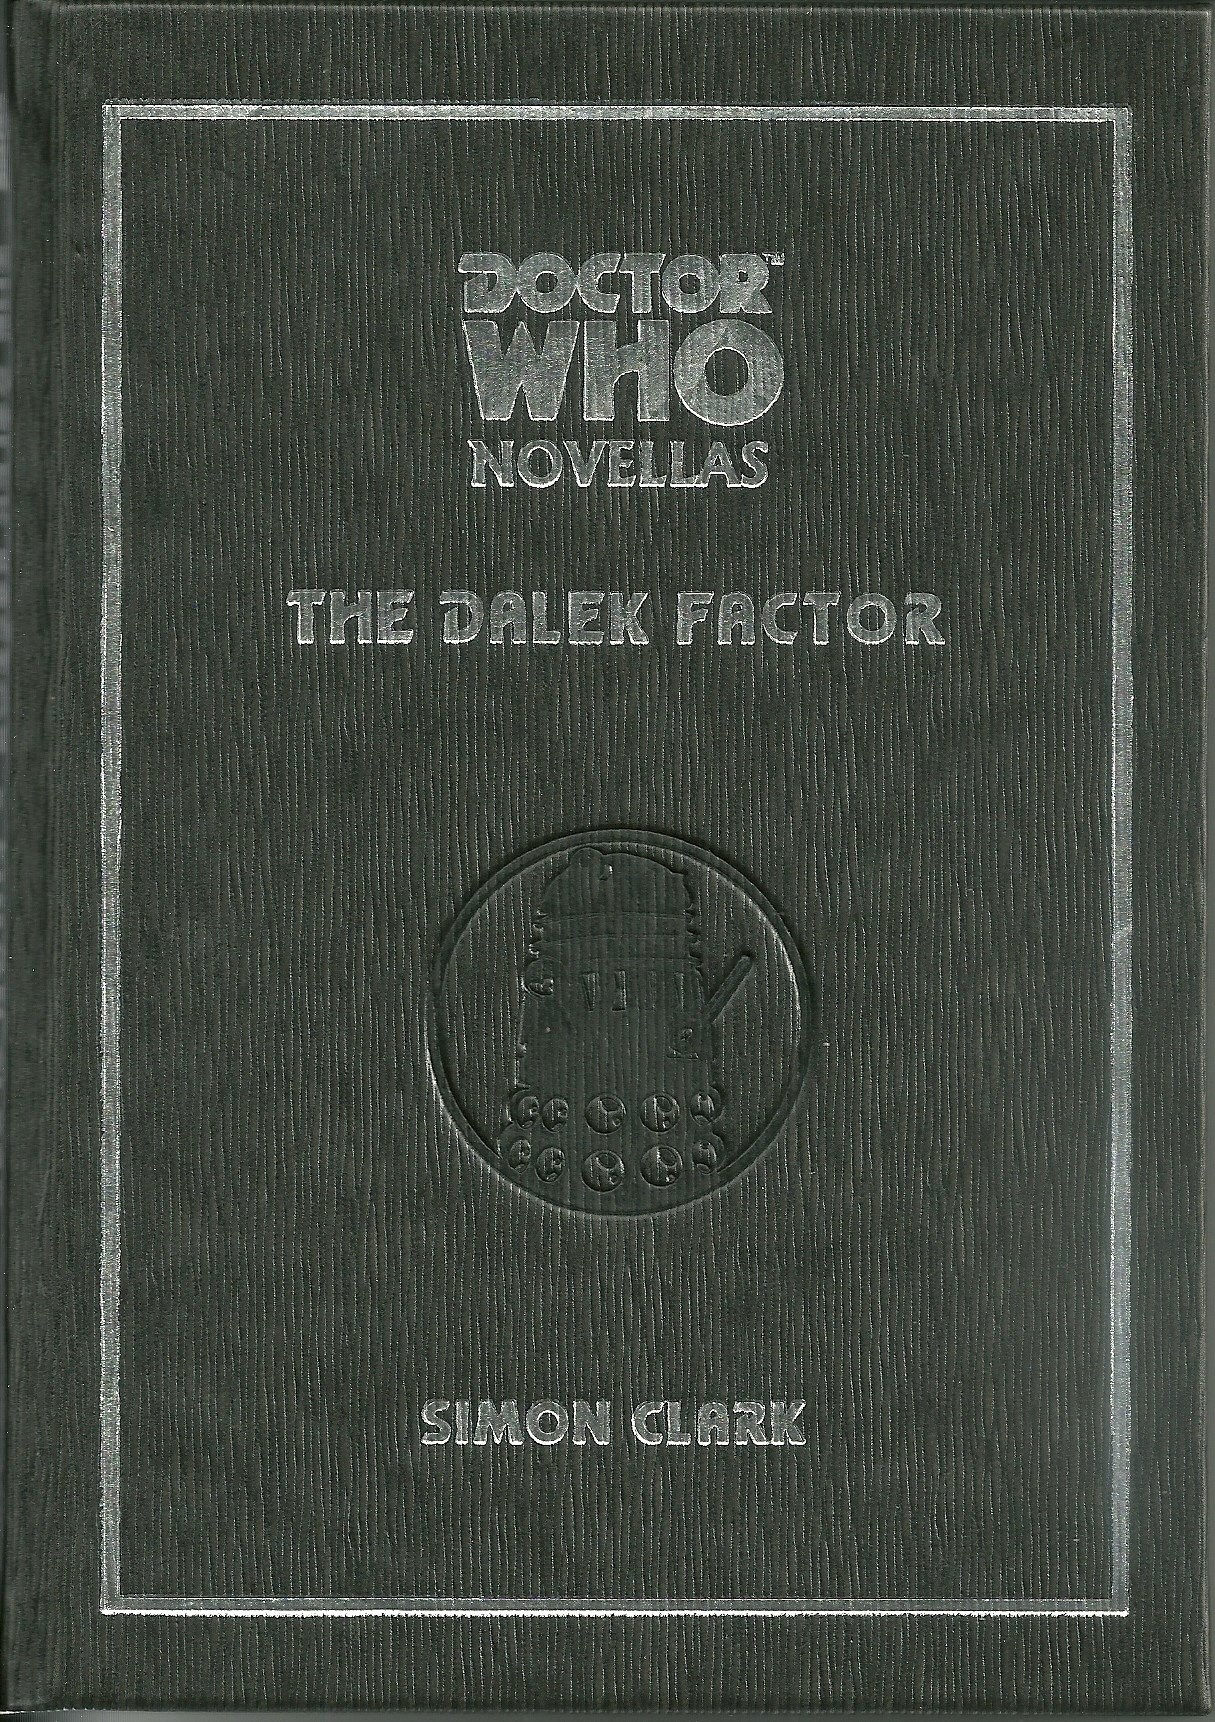 Dr Who: The Dalek Factor